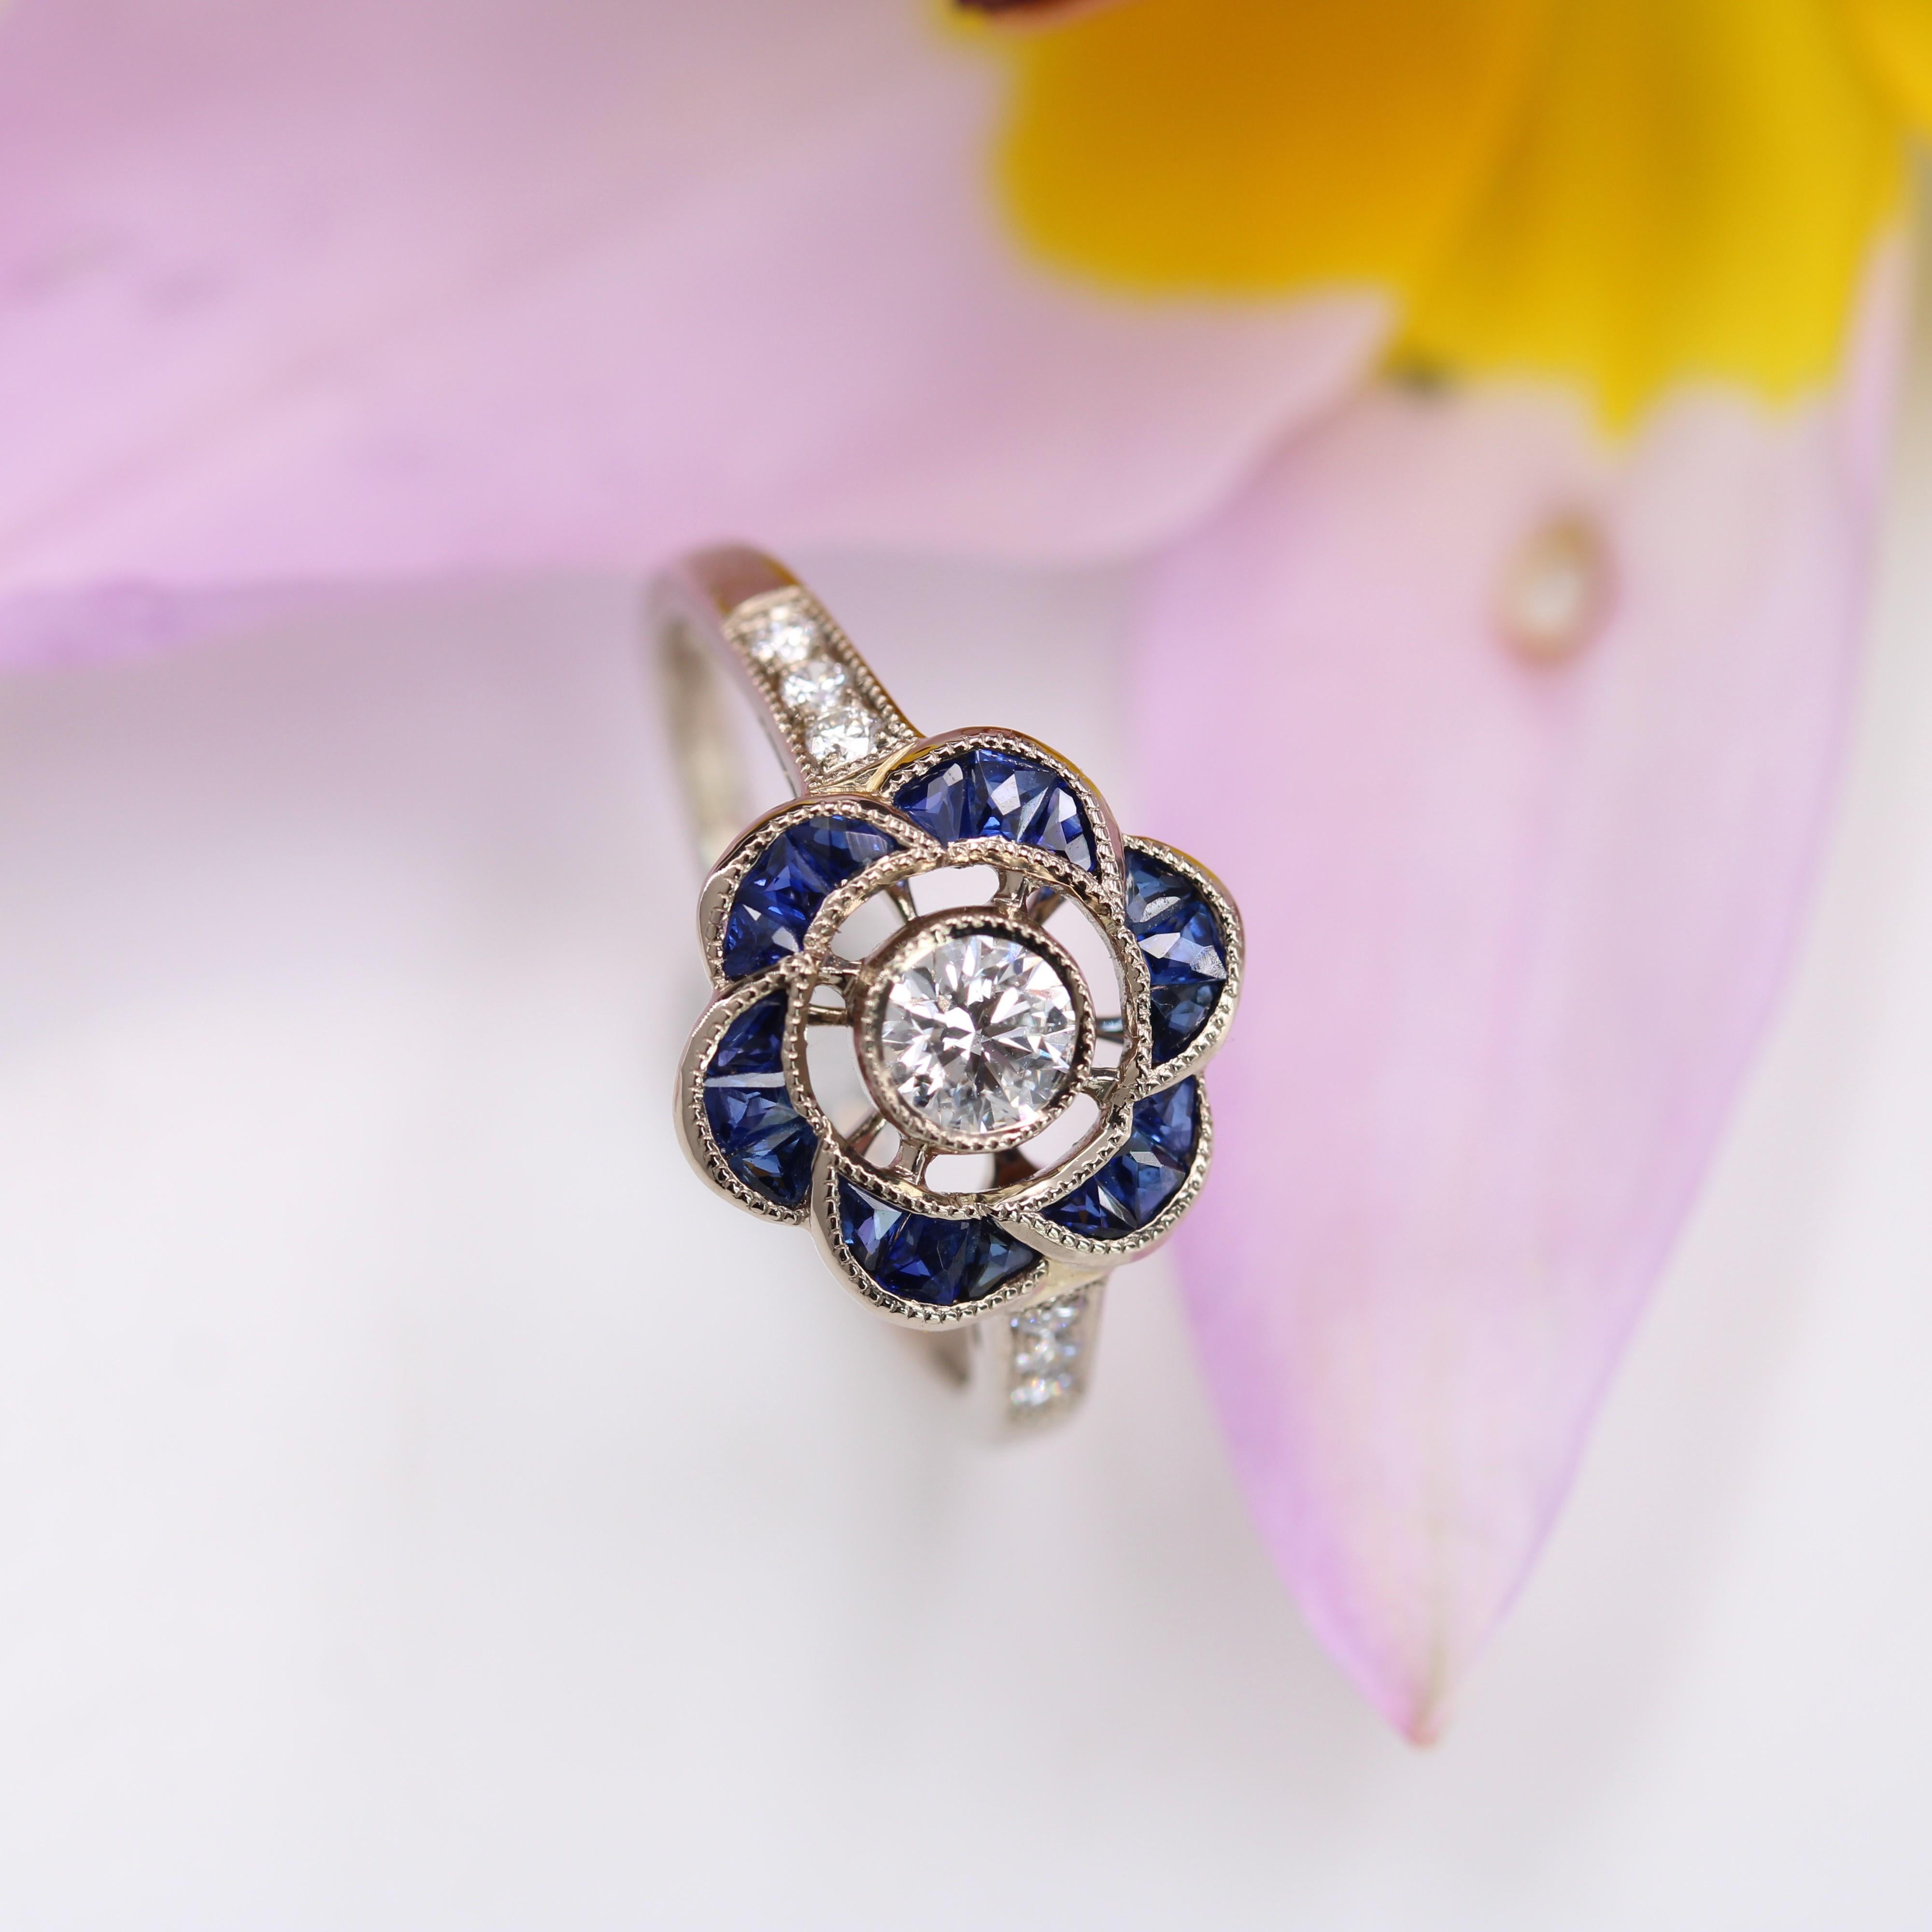 New Art Deco Style Calibrated Sapphires Diamonds 18 K White Gold Flower Ring For Sale 5